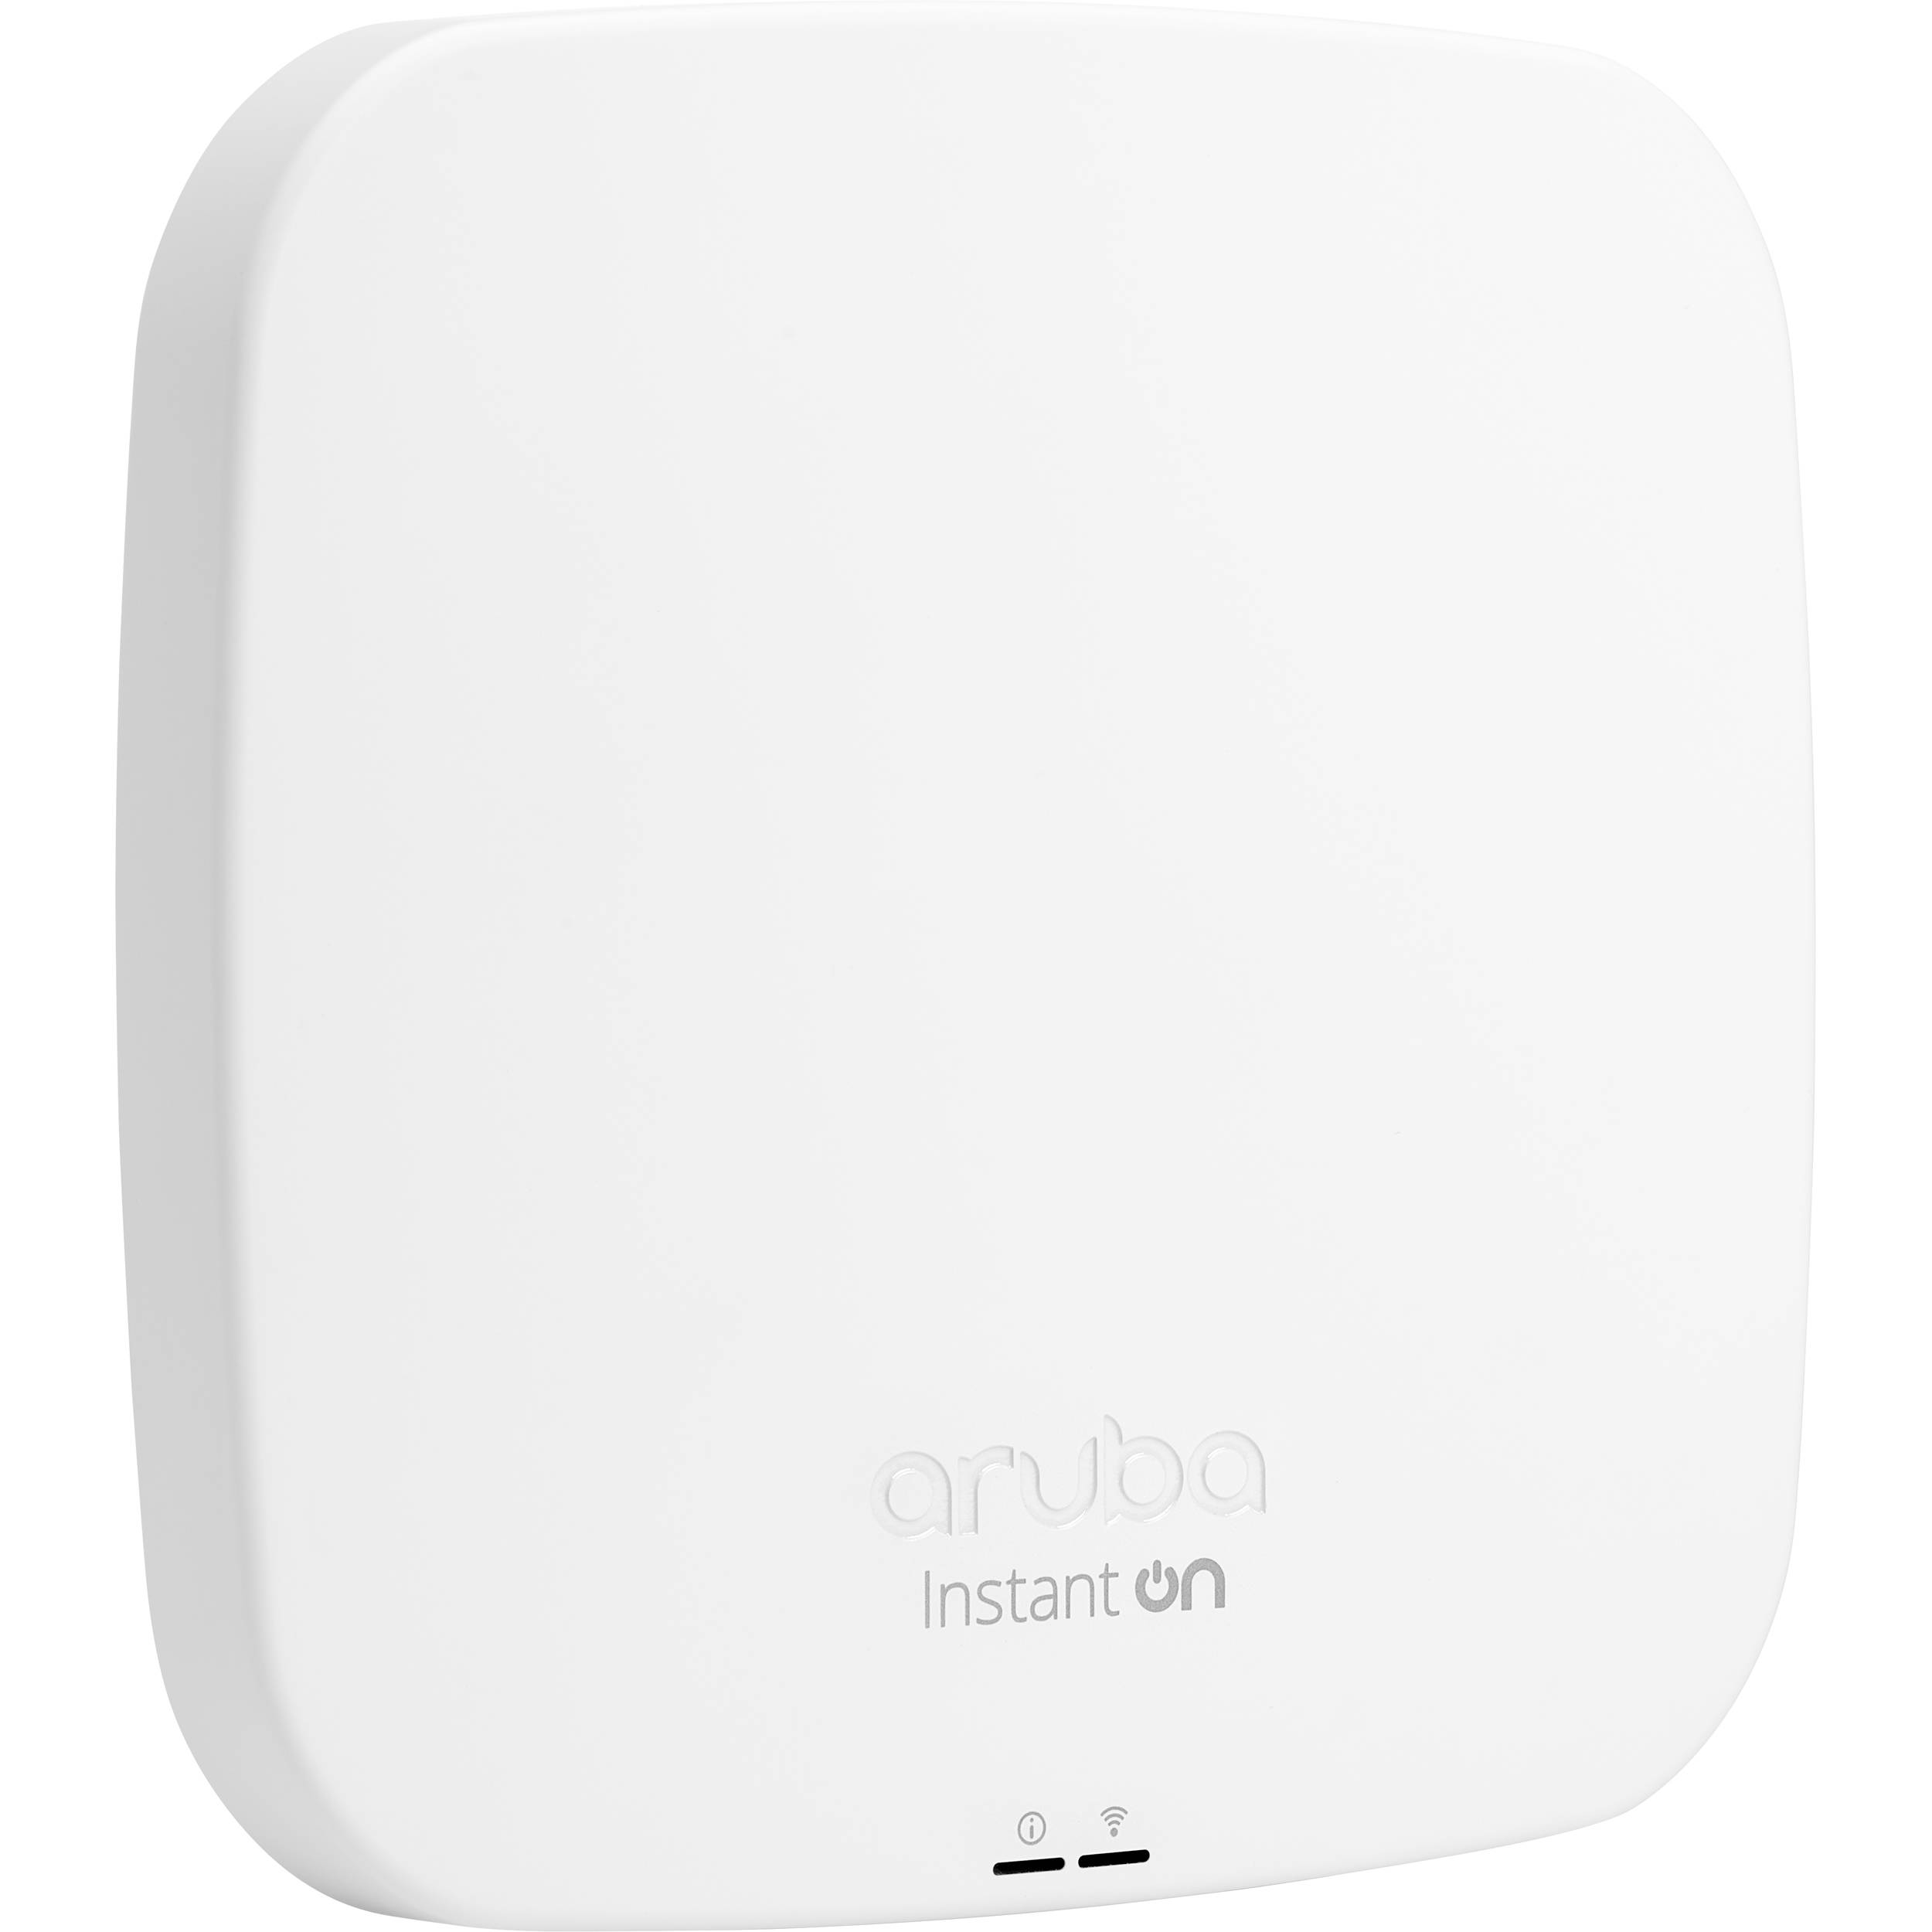 R2X05A | HP Aruba Instant ON AP15 (US) 4X4 11AC WAVE2 Indoor Access Point